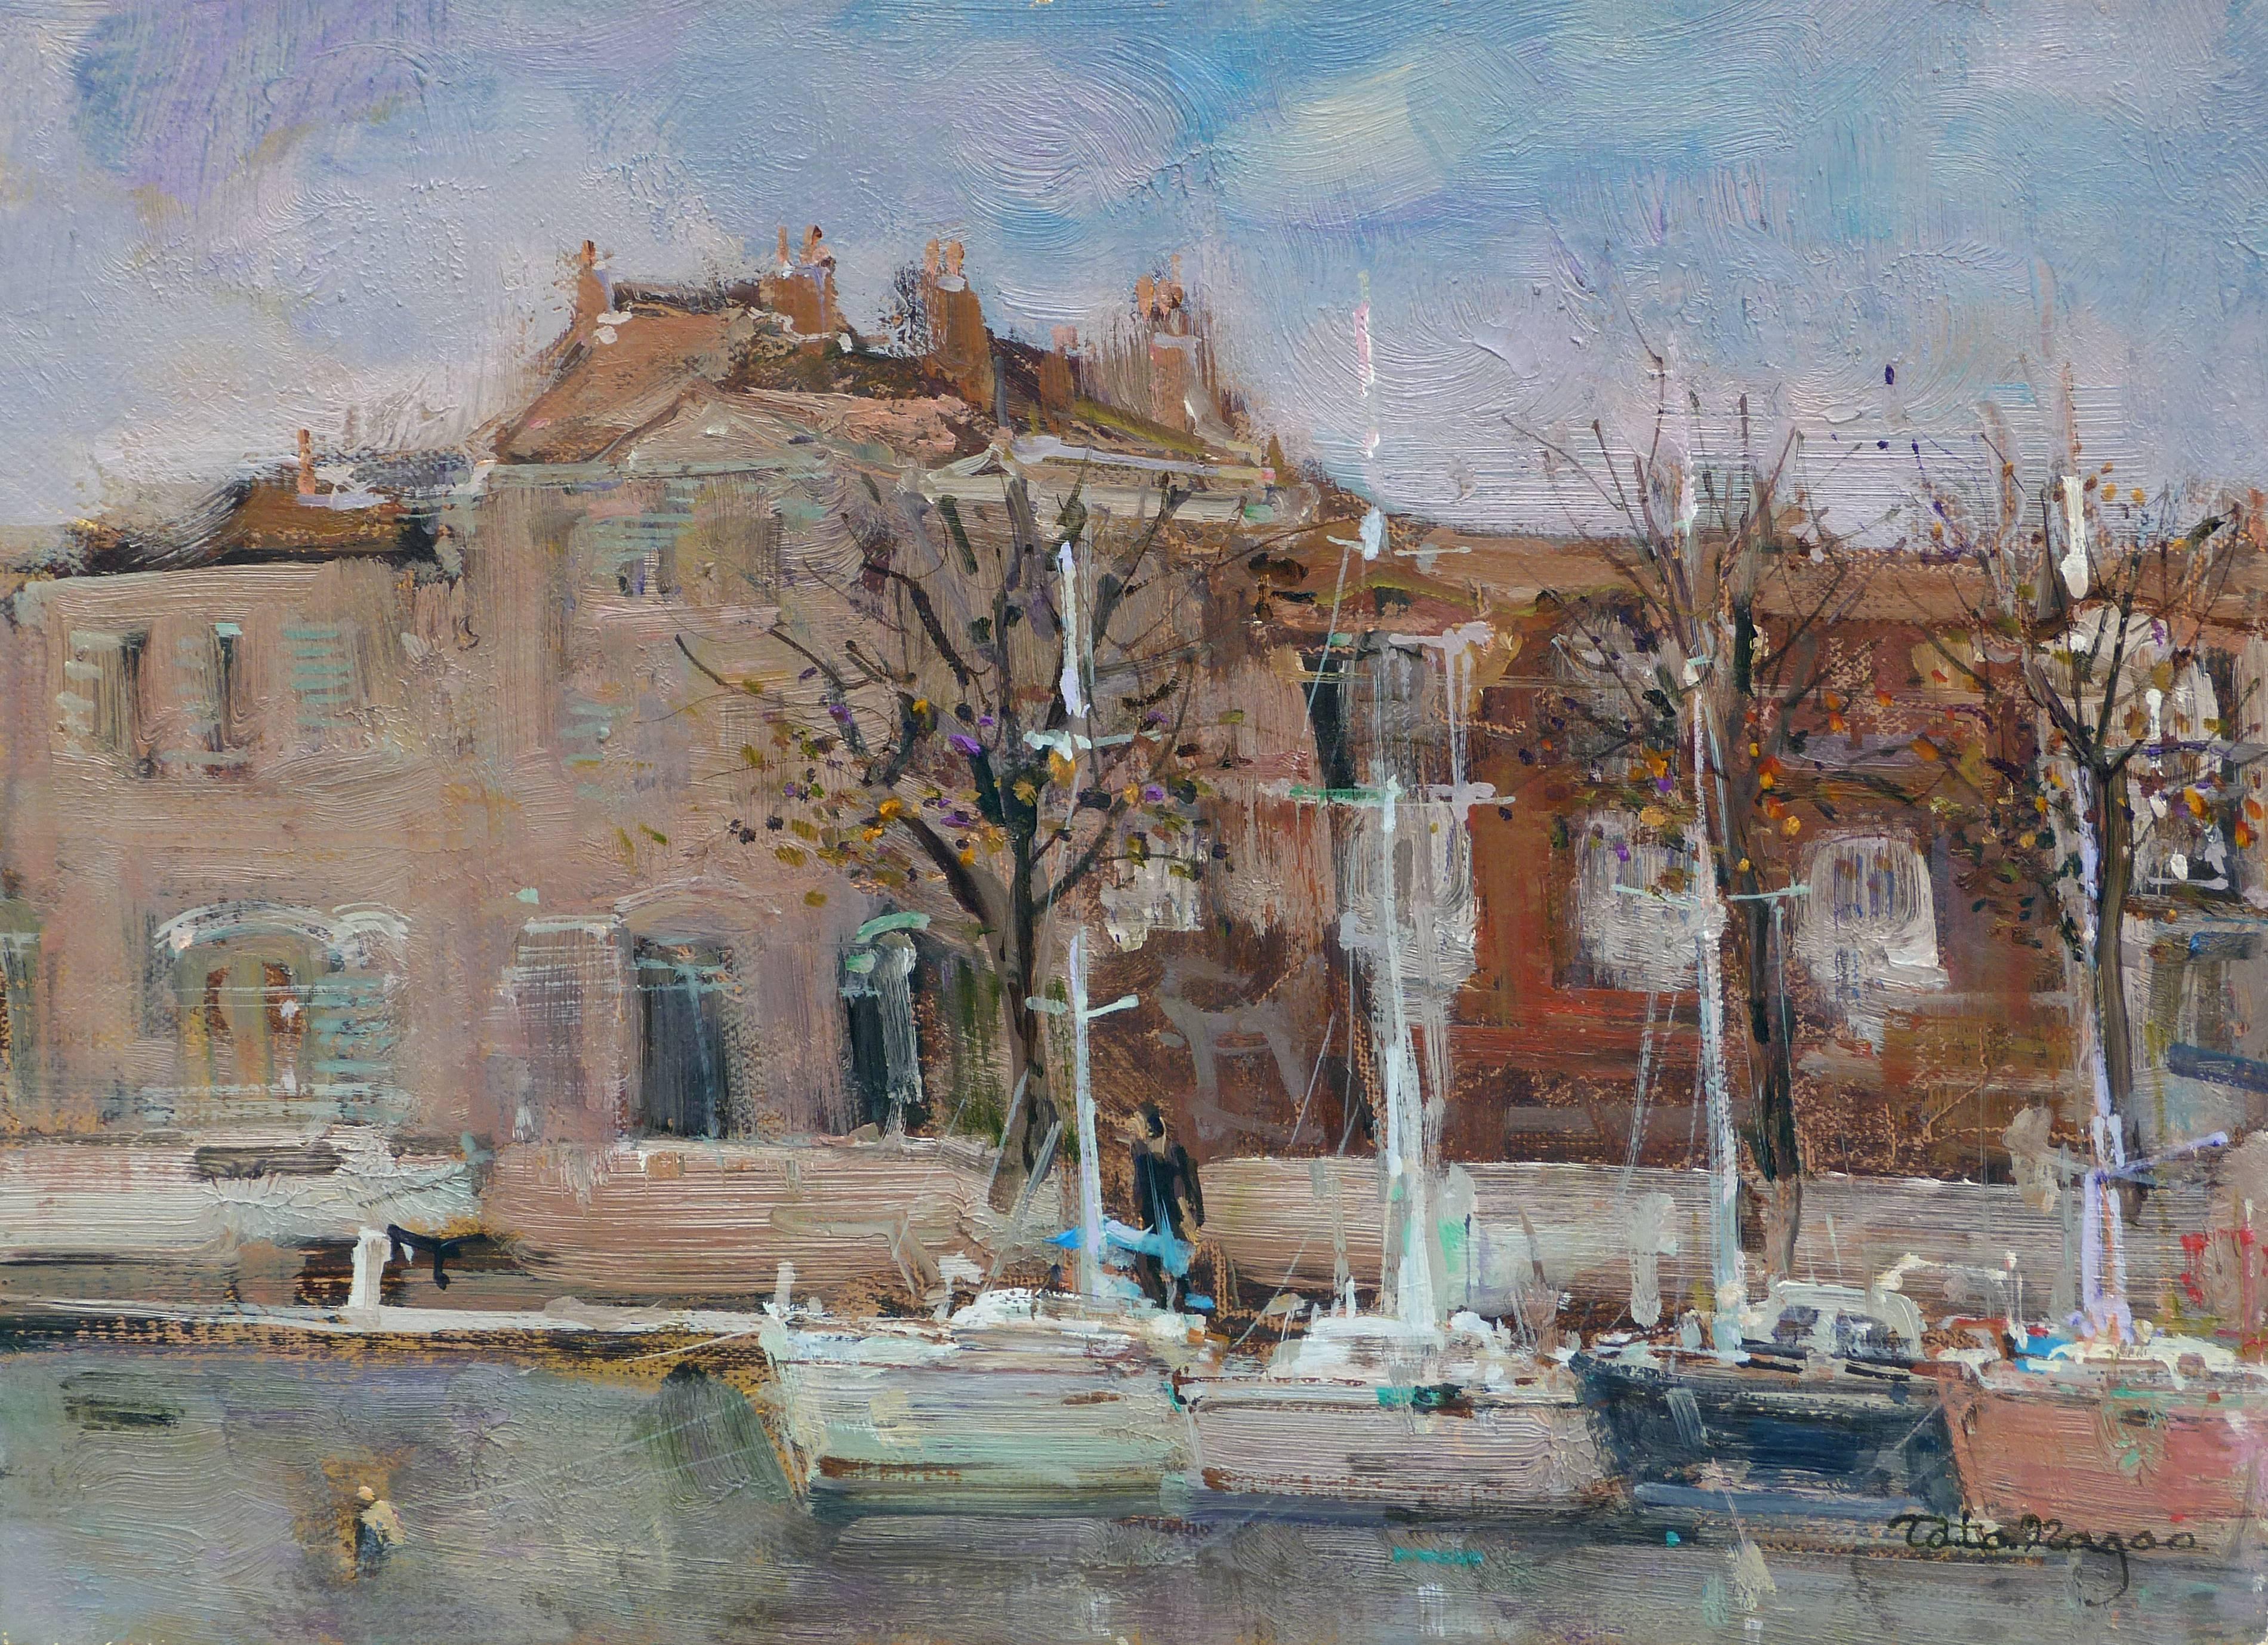 Tota NAGAO Landscape Painting - The french seaport of La Rochelle in France